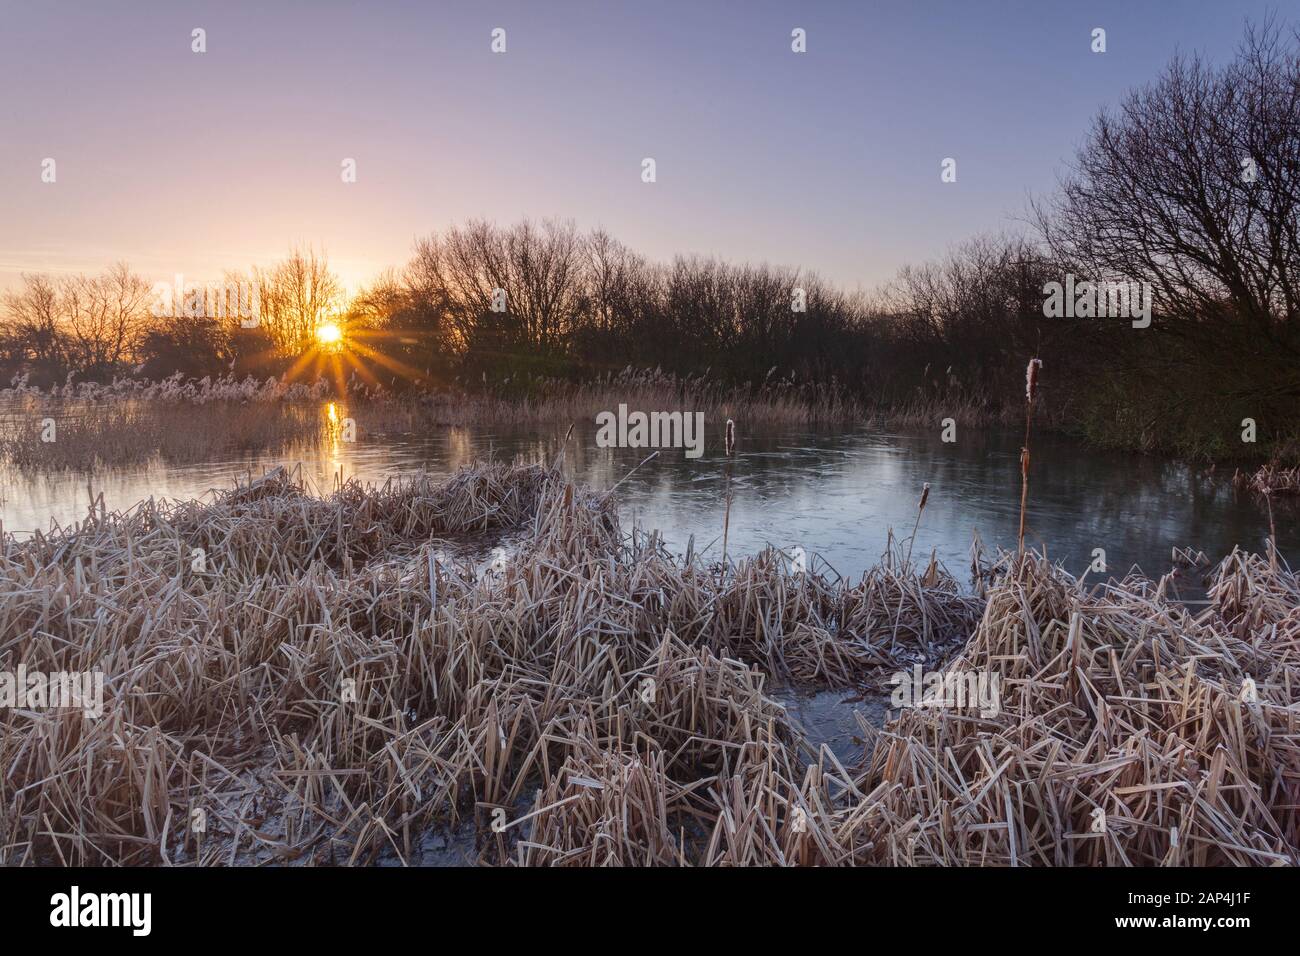 Barton-upon-Humber, North Lincolnshire, UK. 21st January 2020. UK Weather: Sunrise on a frosty Winter morning at a nature reserve. Credit: LEE BEEL/Alamy Live News. Stock Photo